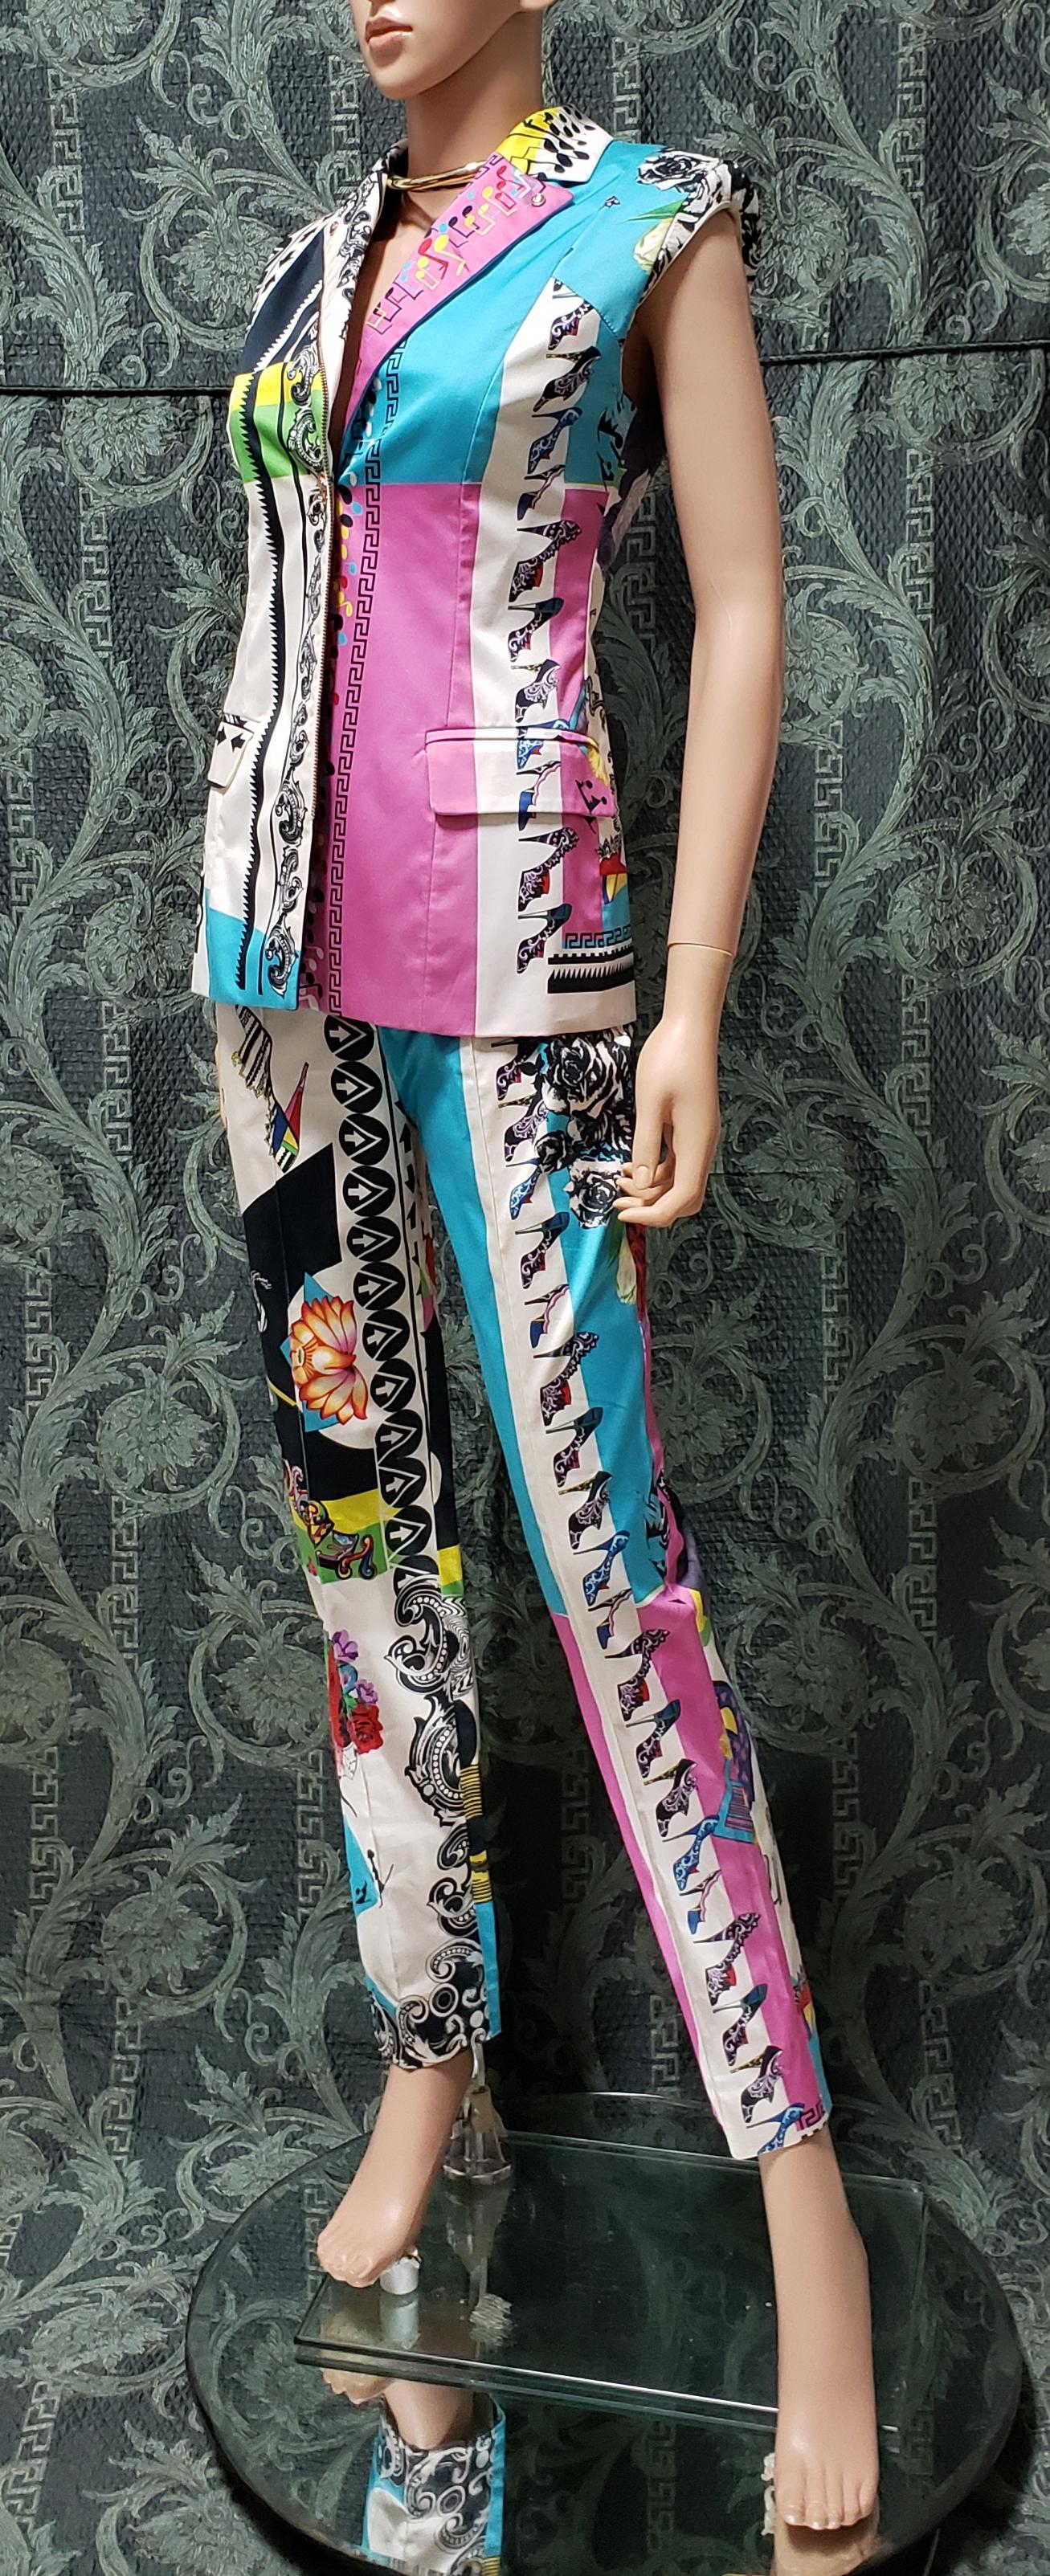 Gray Resort 2013 Look # 4 NEW VERSACE ICONIC PRINT PANT SUIT 38 - 2  For Sale